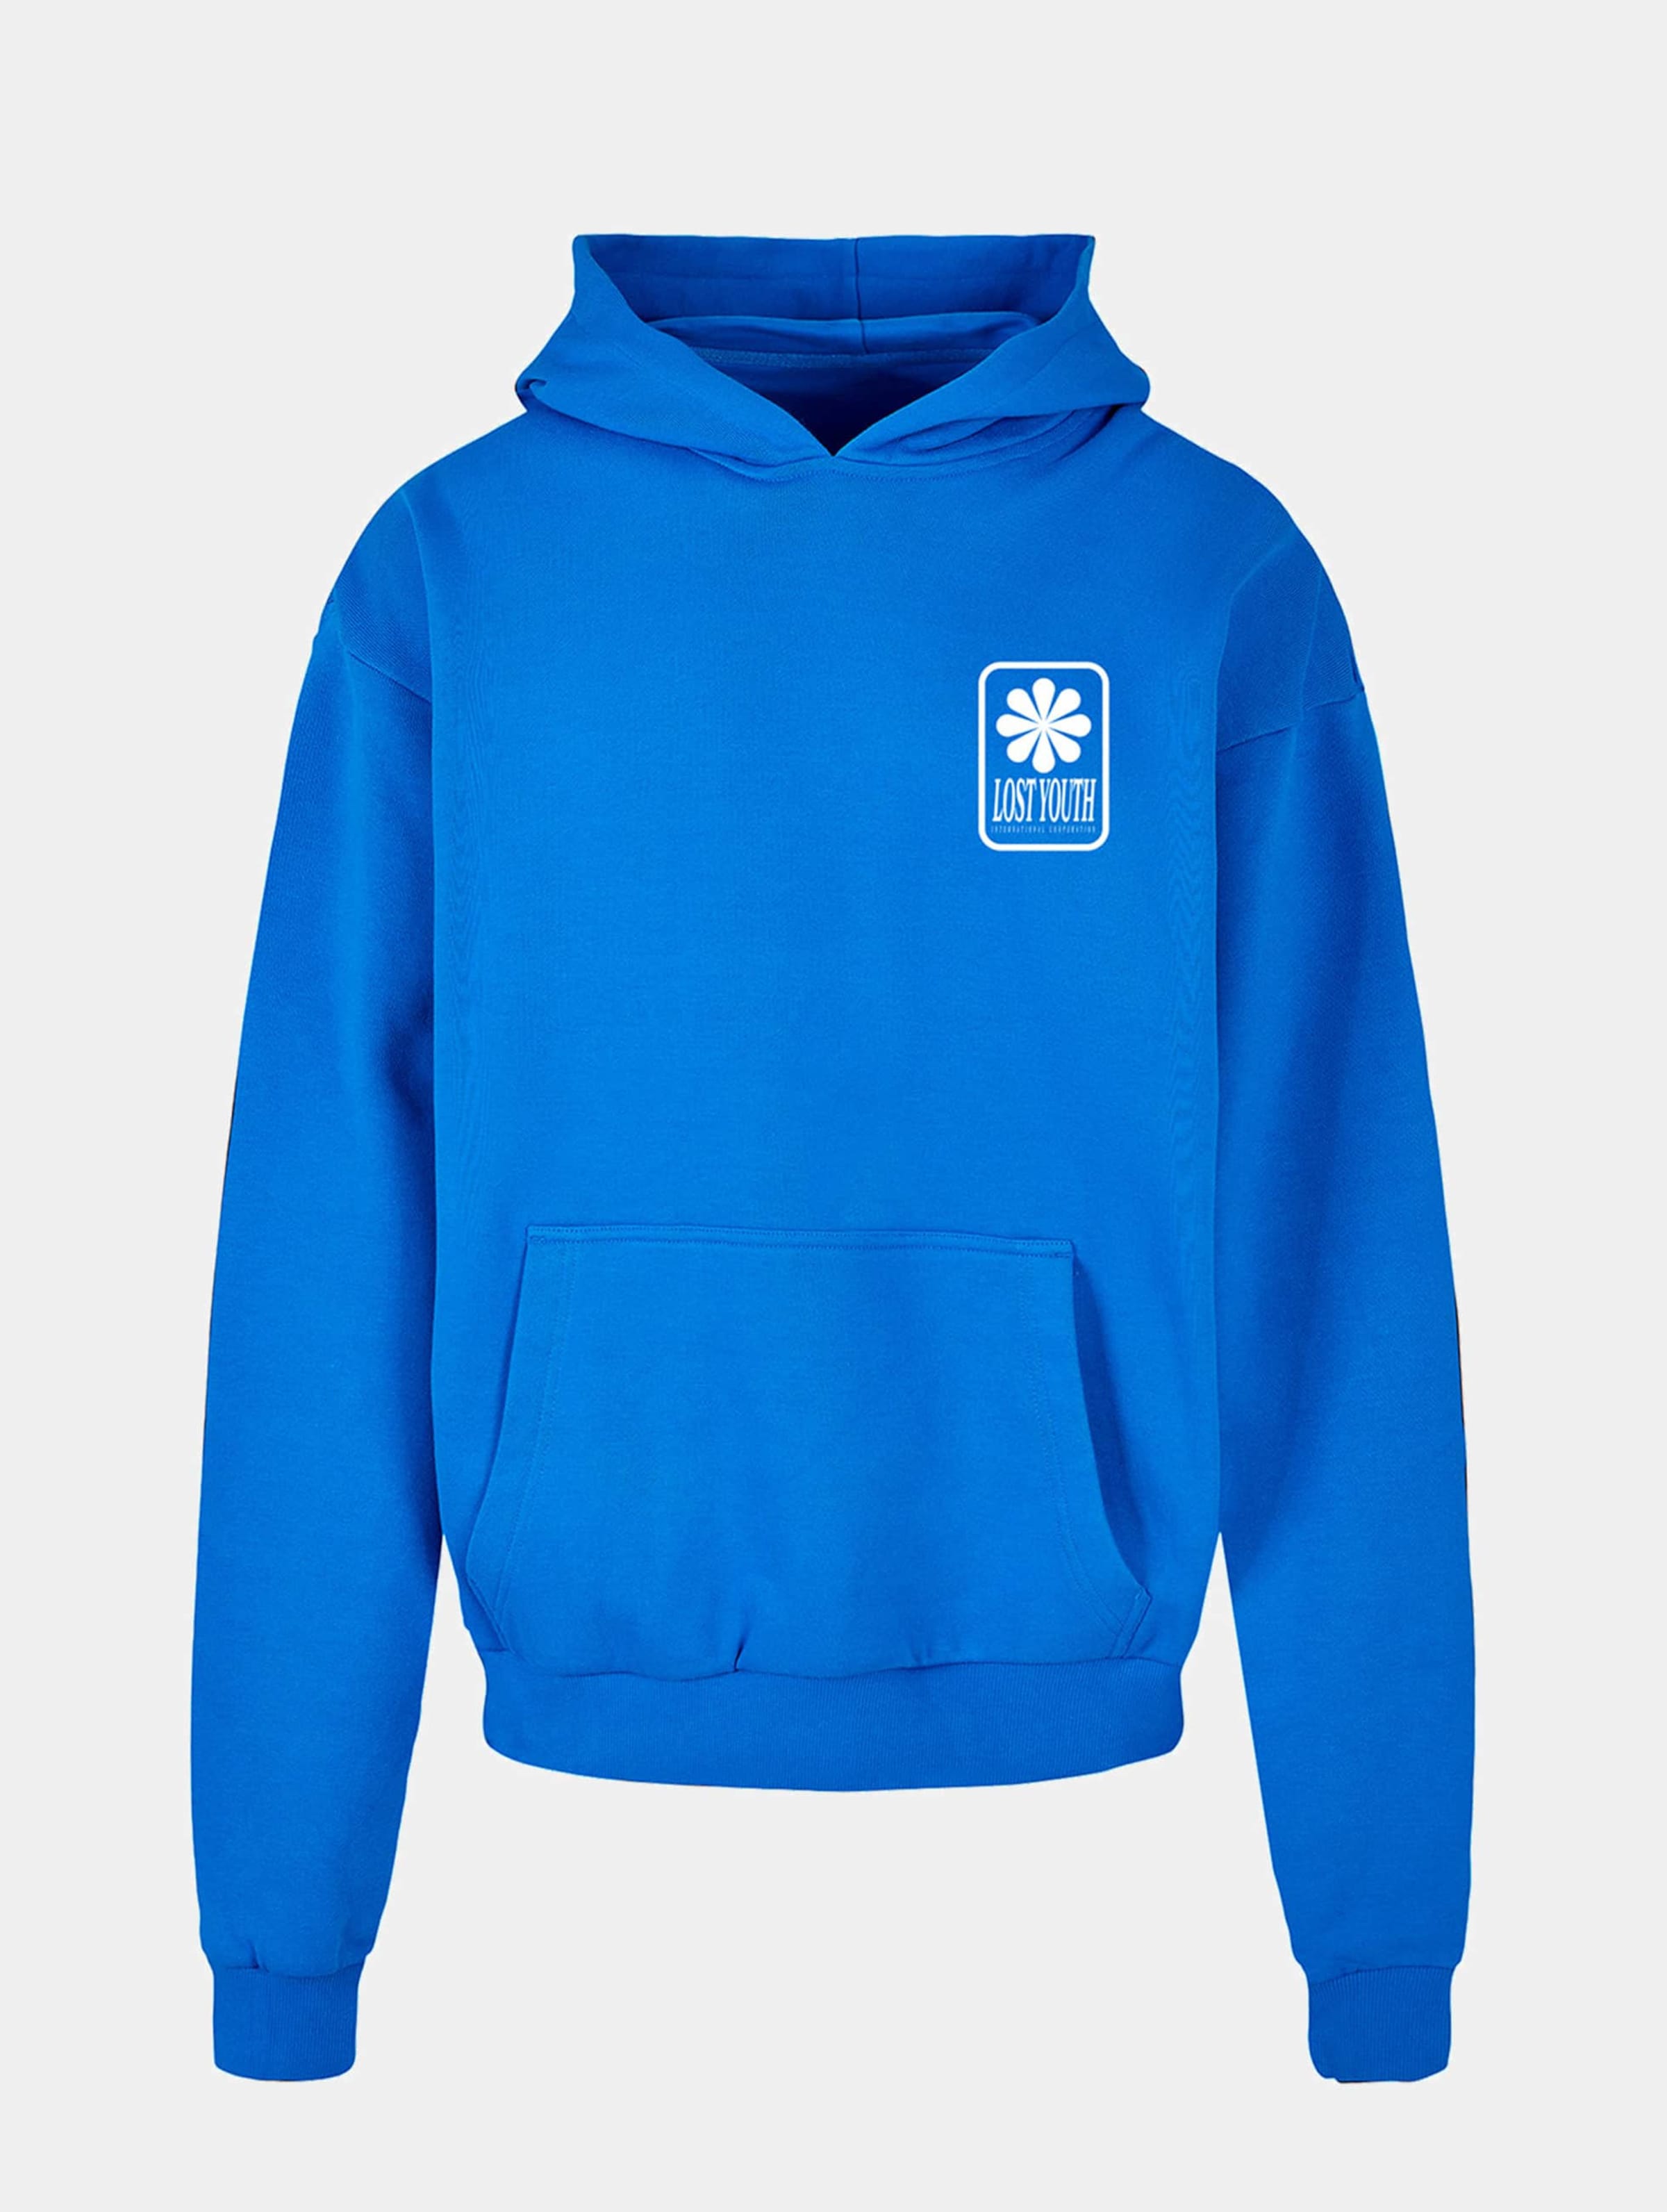 Lost Youth LY HOODY - ICON V.4 Mannen op kleur blauw, Maat 4XL